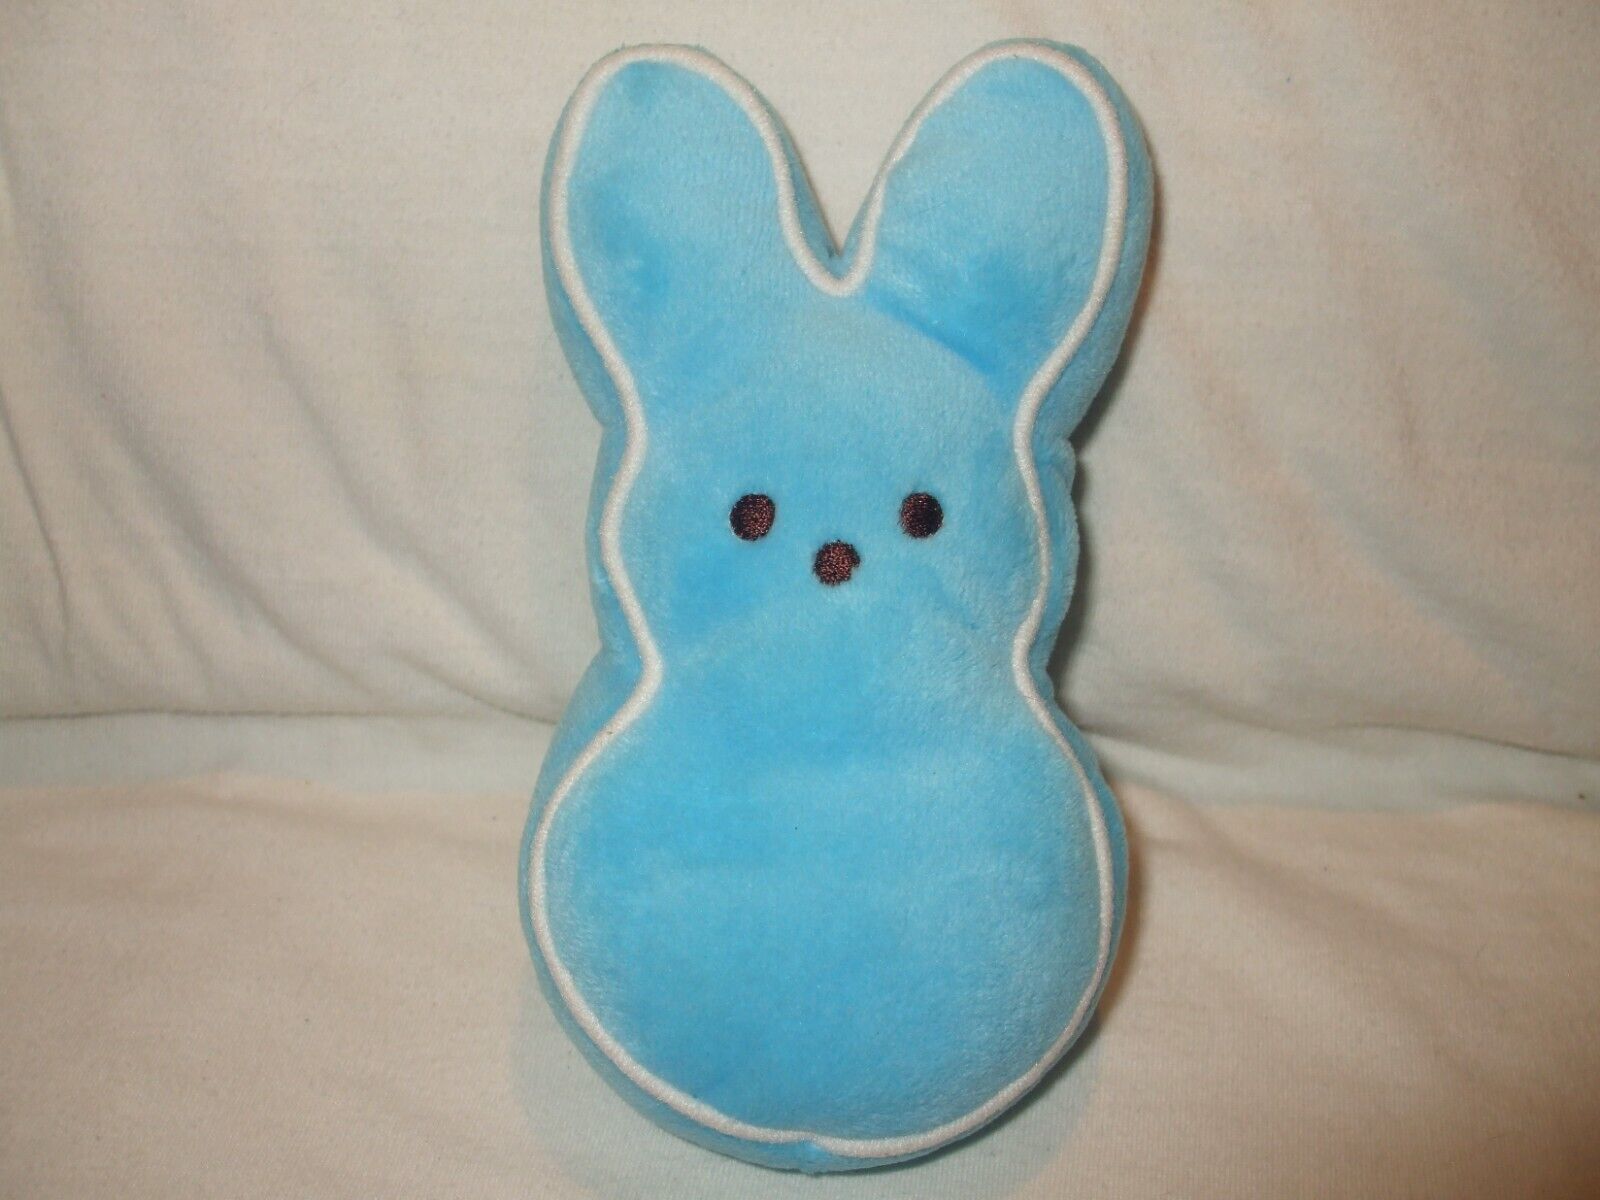 PEEPS EASTER BEANBAG PLUSH BLUE BUNNY 6” 2006 WHITE PIPING OUTLINE NO TAG